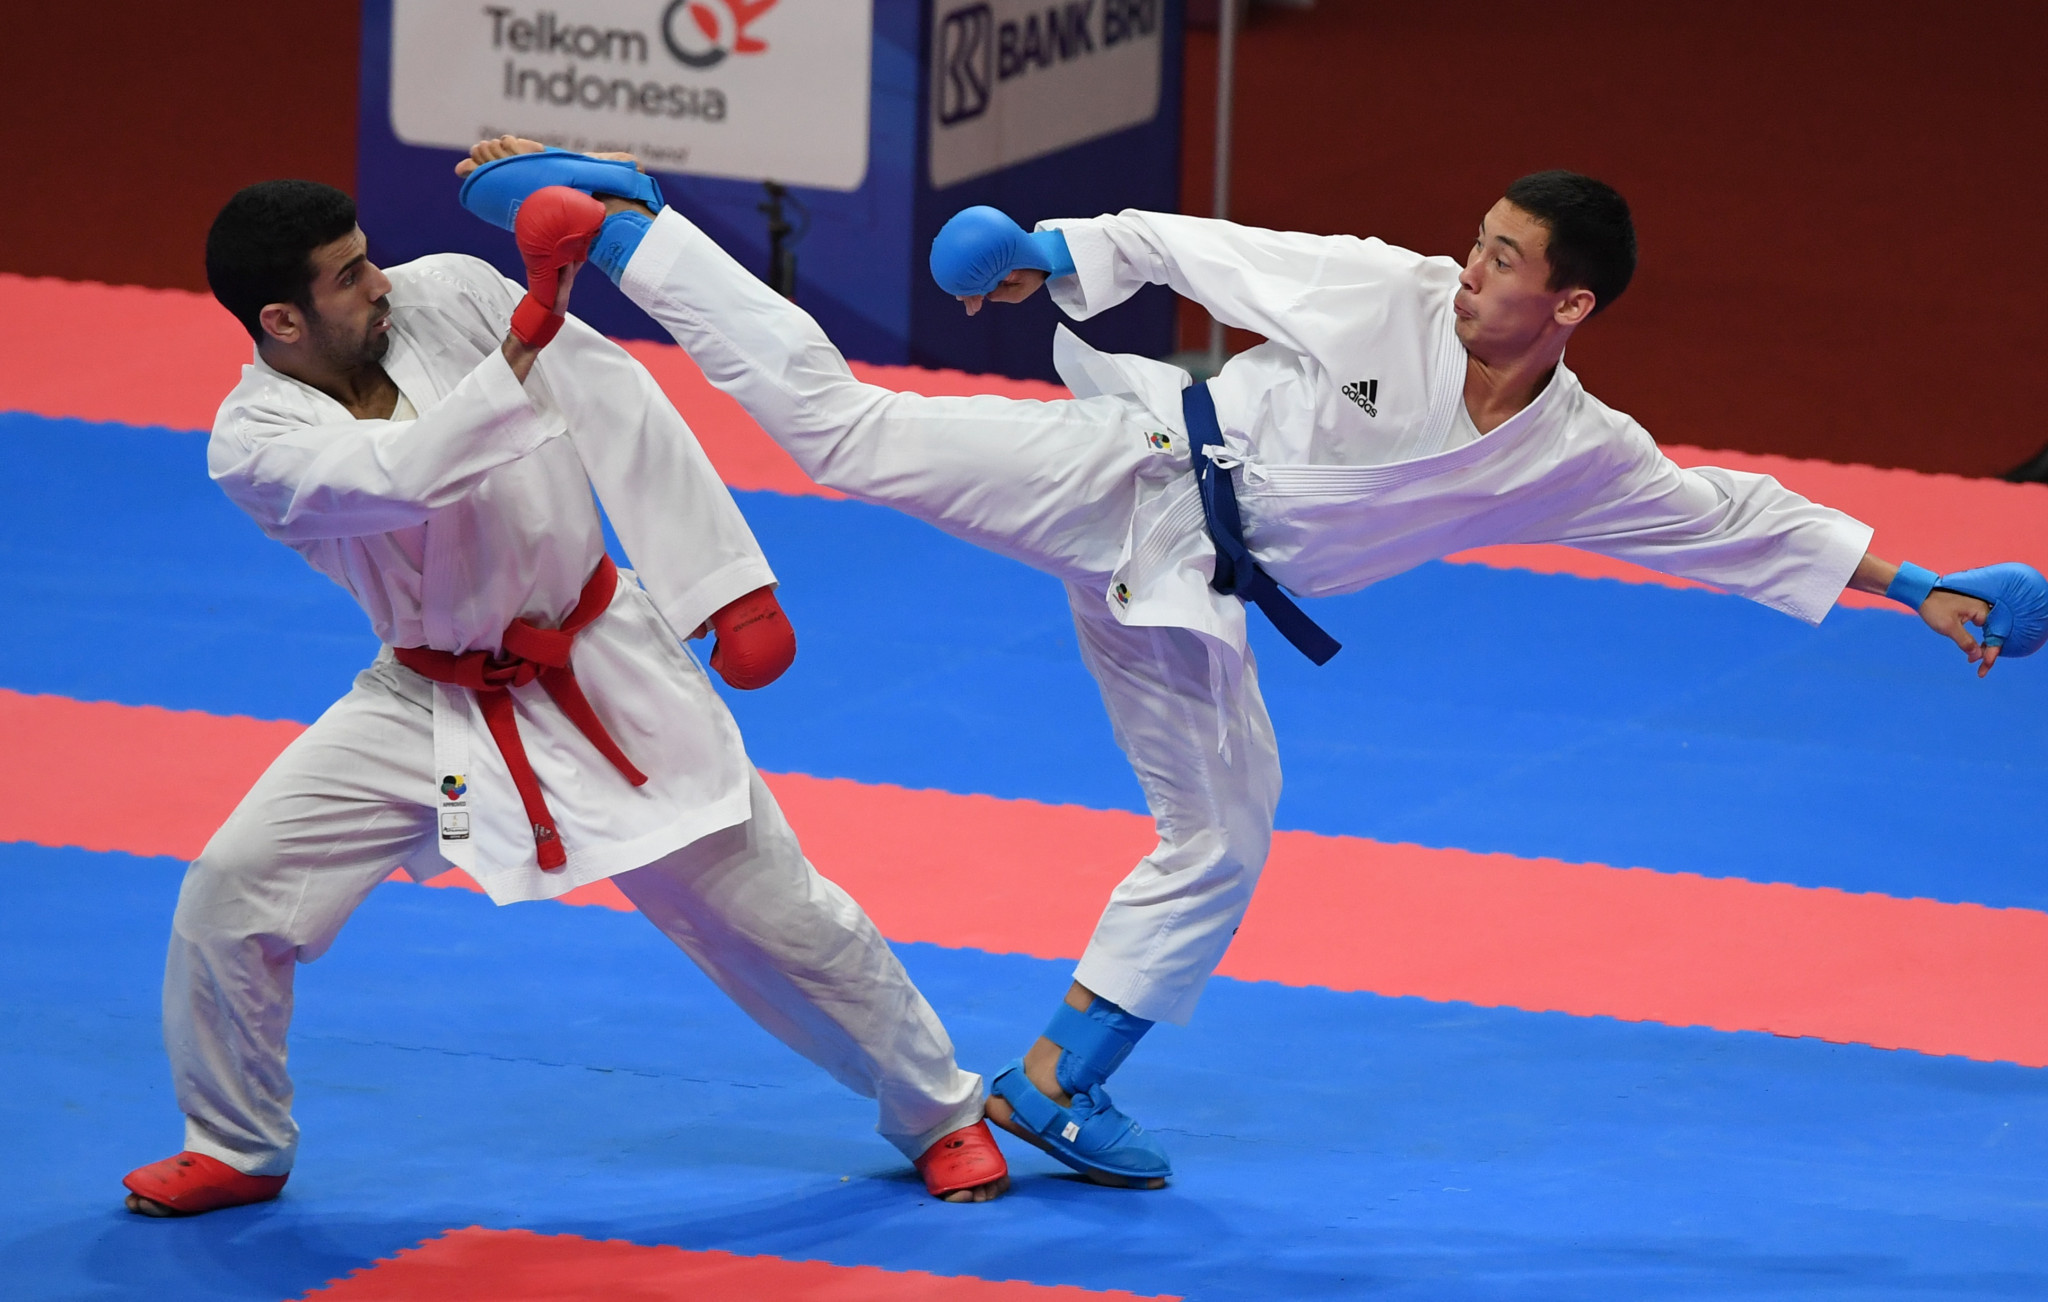 Bronze medals awarded on second day of Asian Karate Championships